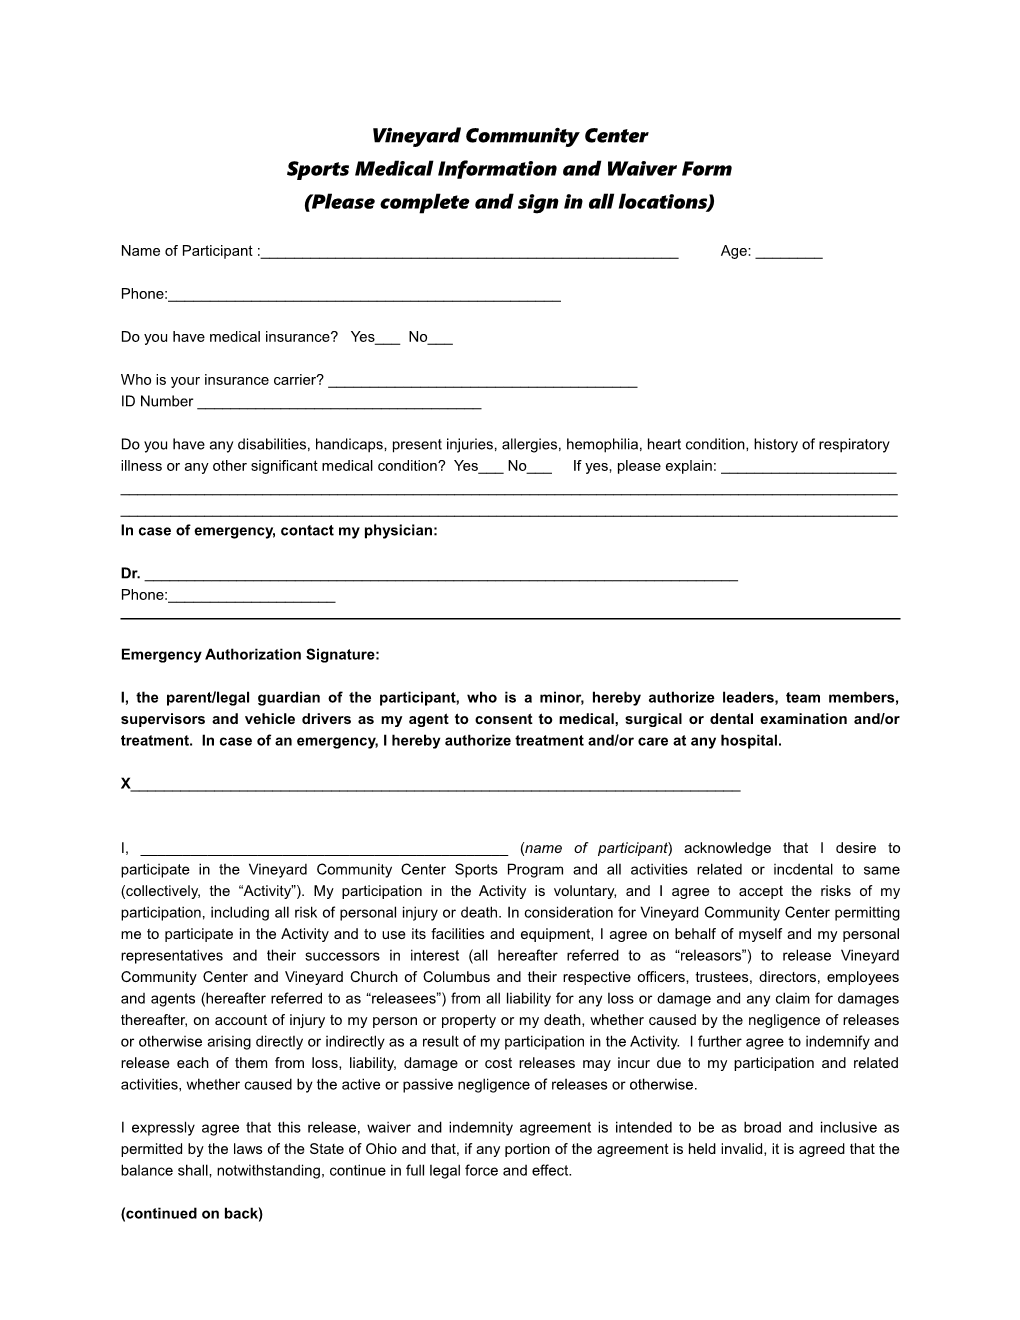 Sports Medical Information and Waiver Form